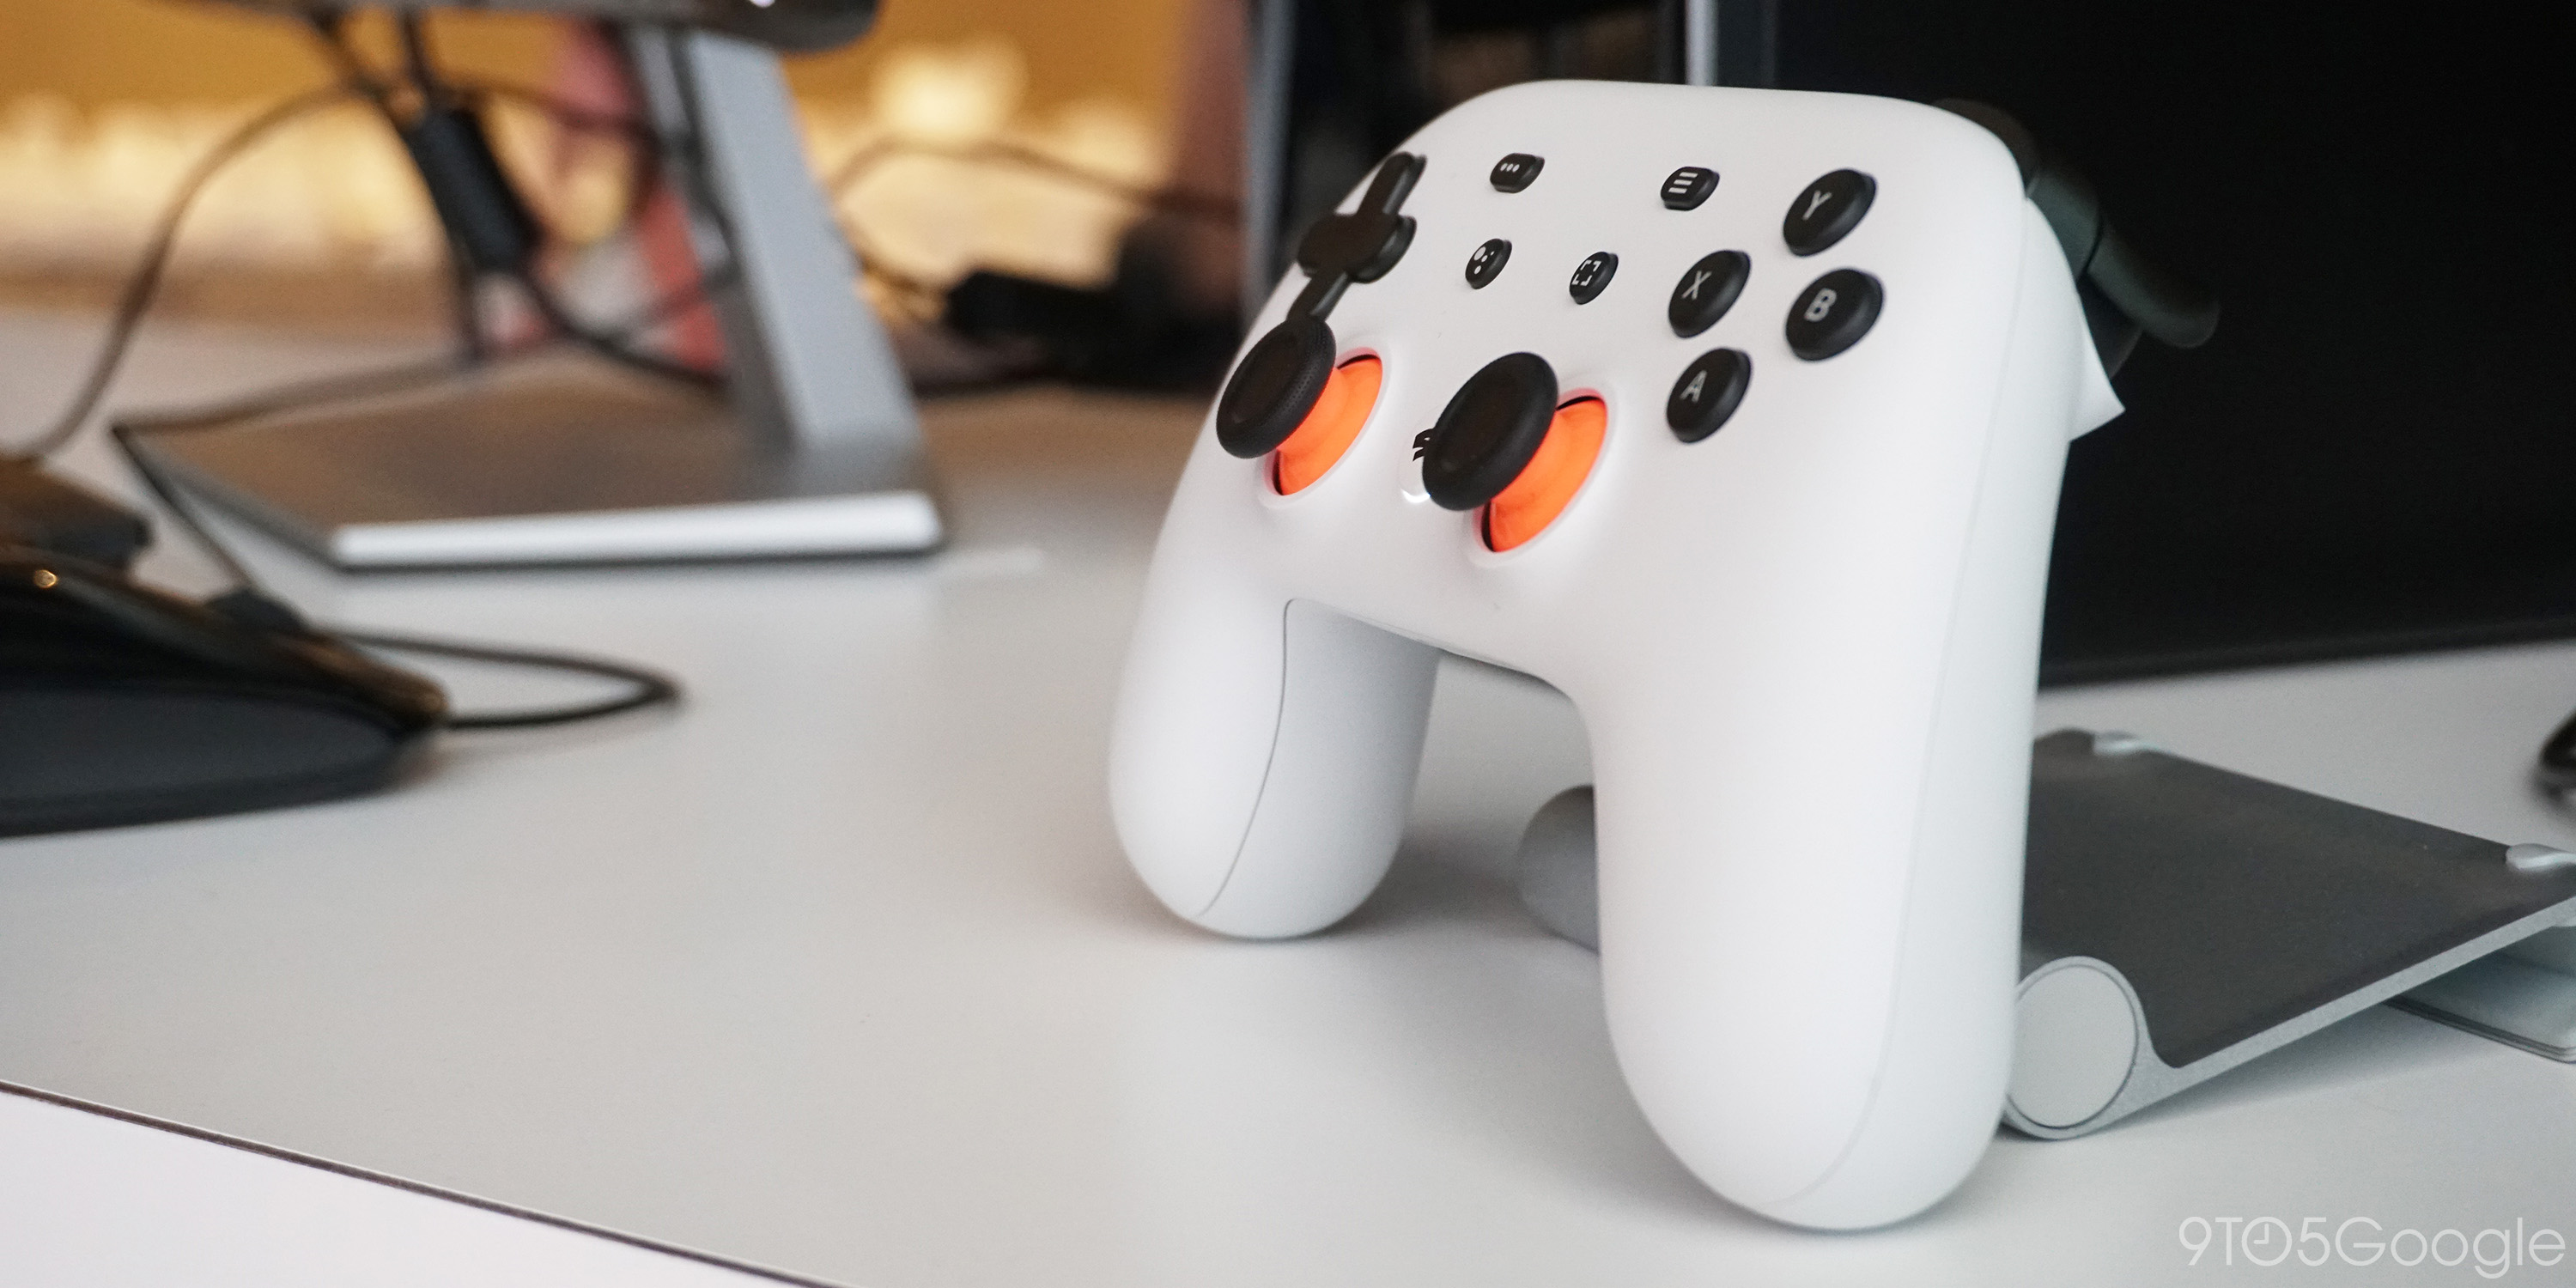 stadia with ps4 controller